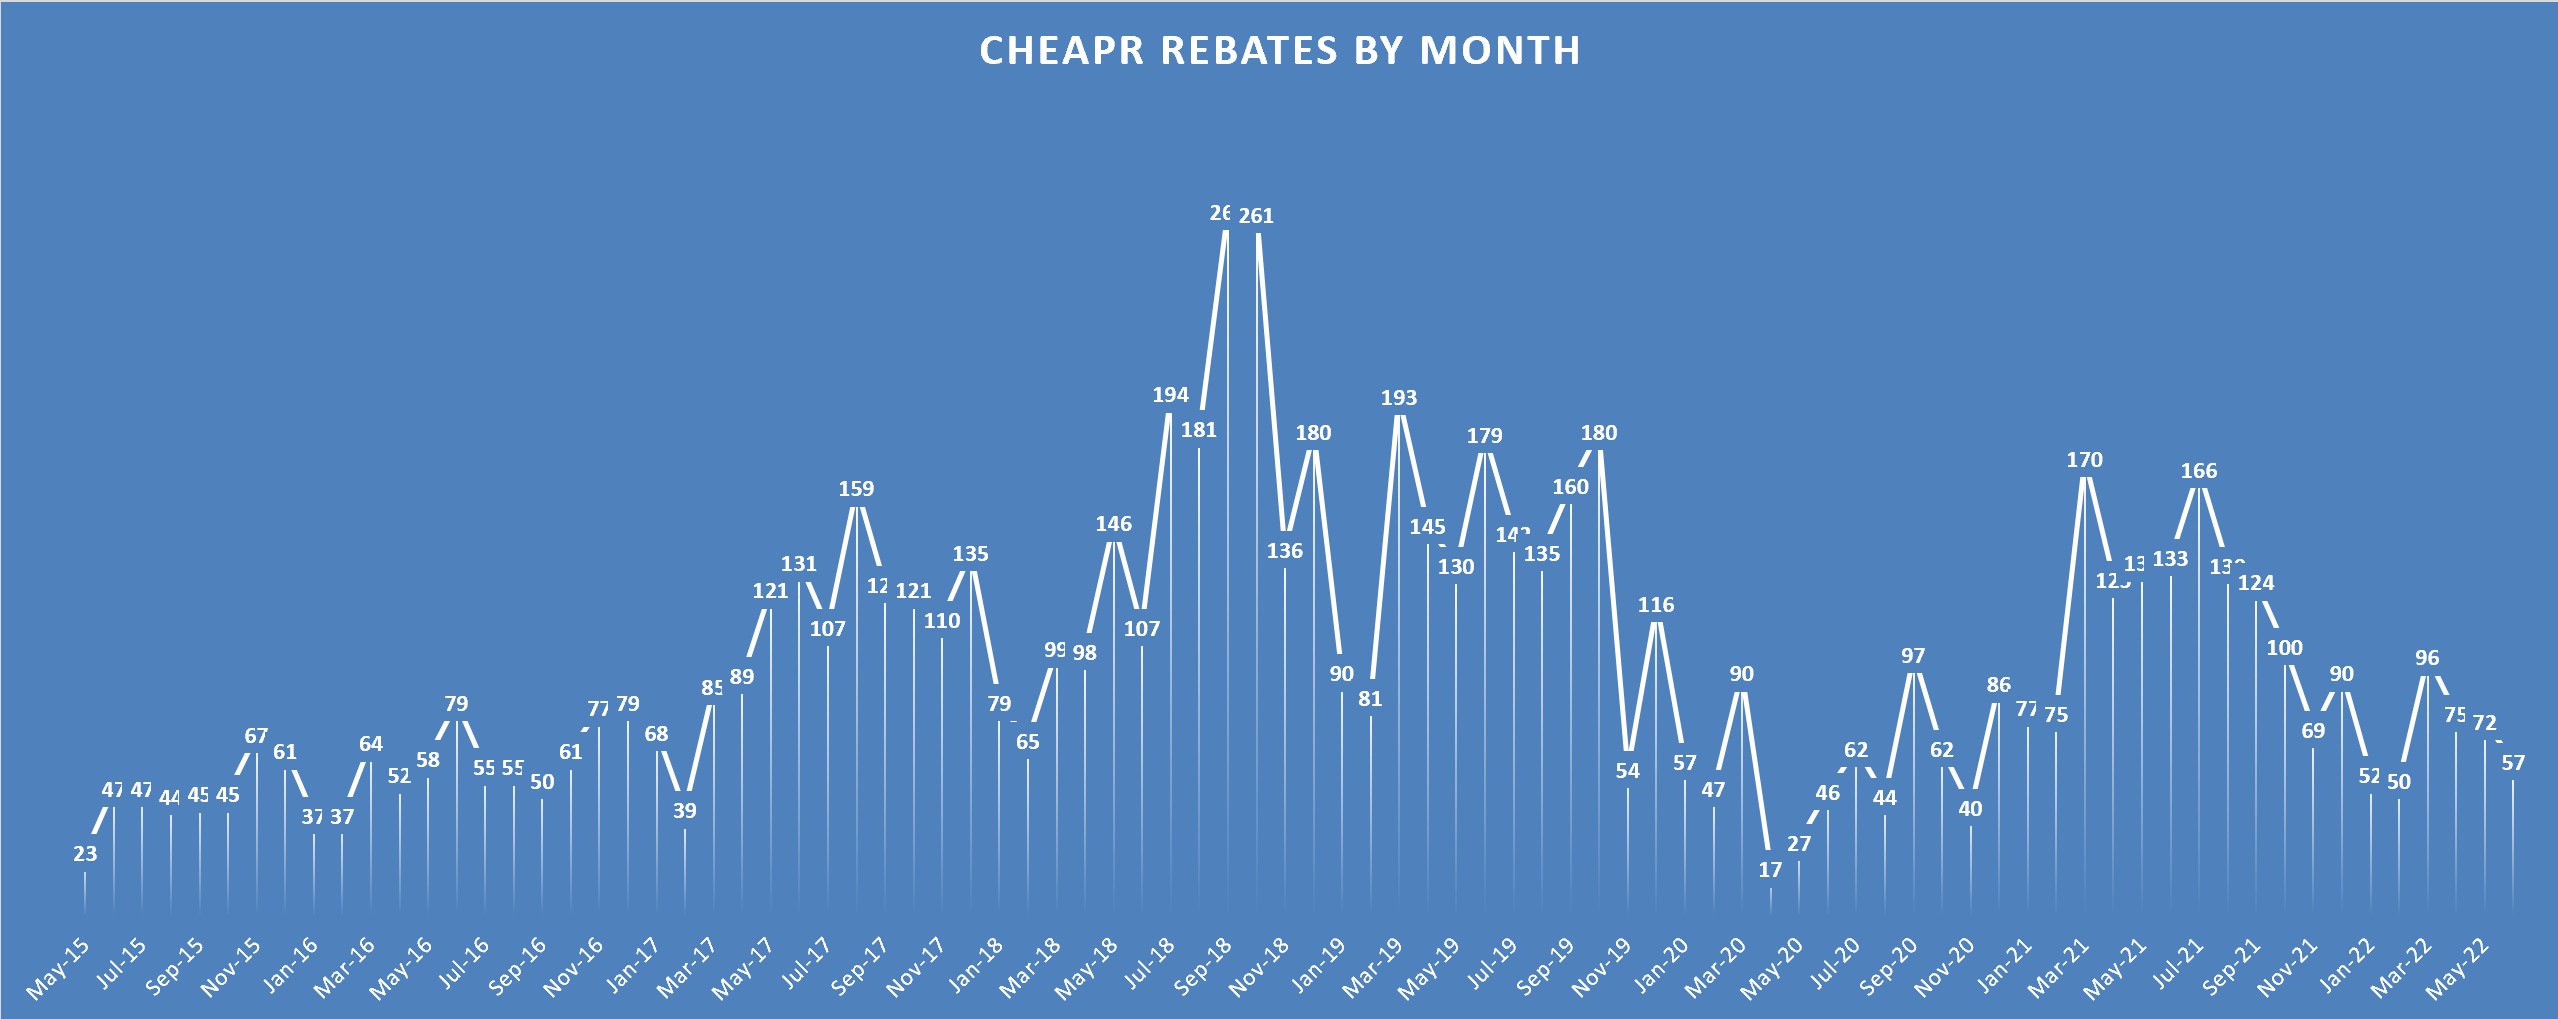 CHEAPR Rebates by month through June, 2022